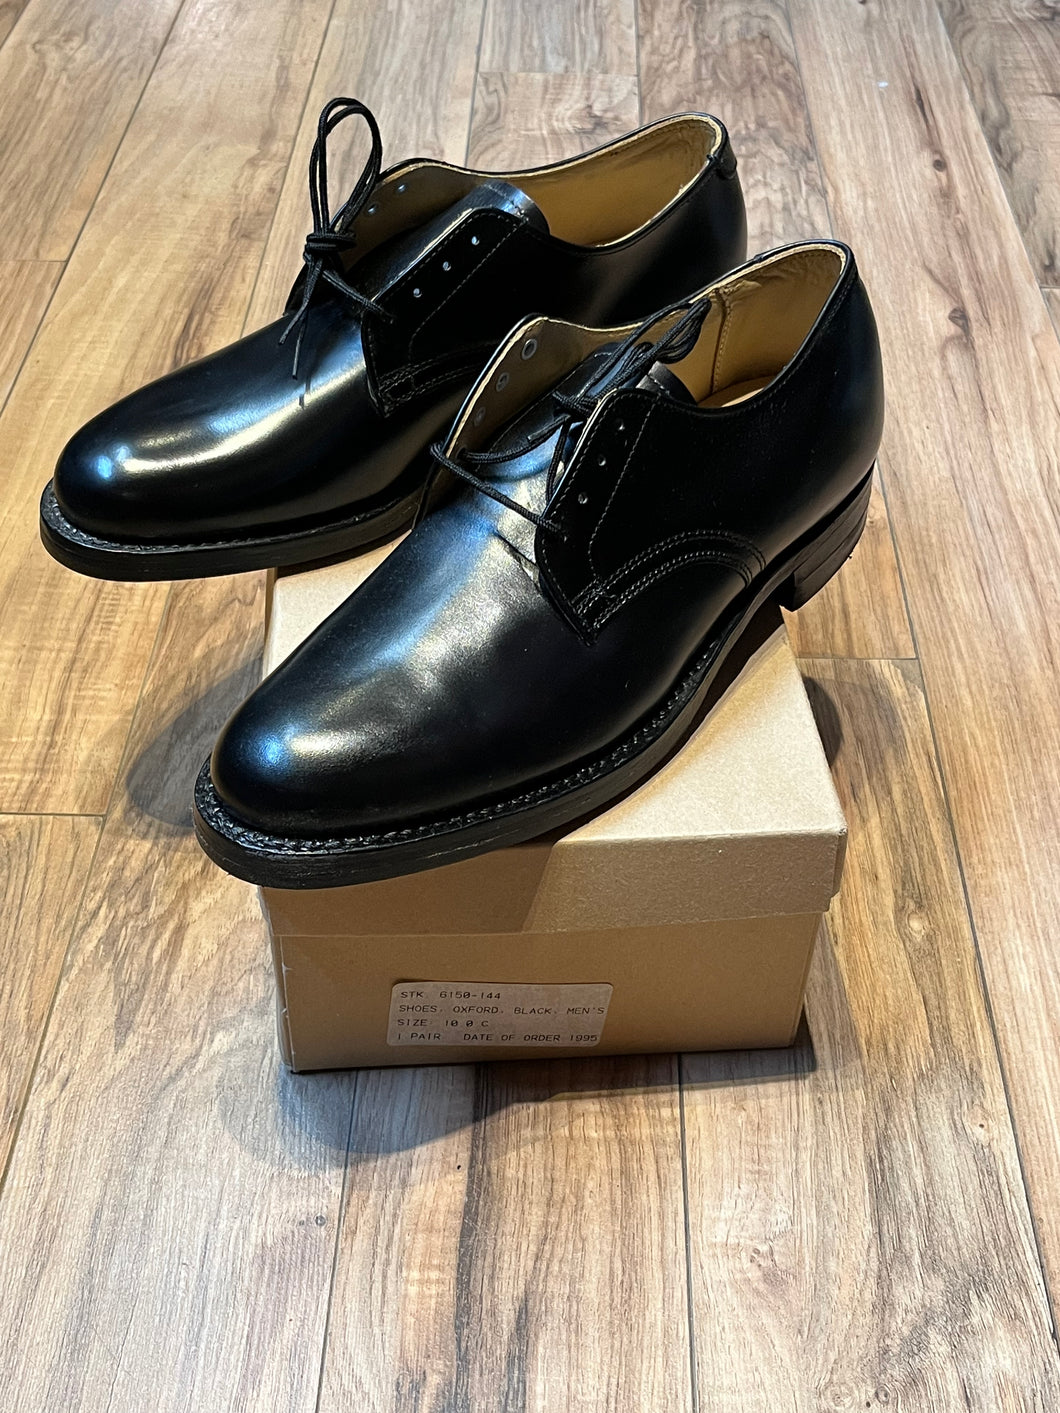 Vintage 1990’s Deadstock Military Issue Black Leather Oxford Shoes, Made in Canada, Size Men’s 10 US